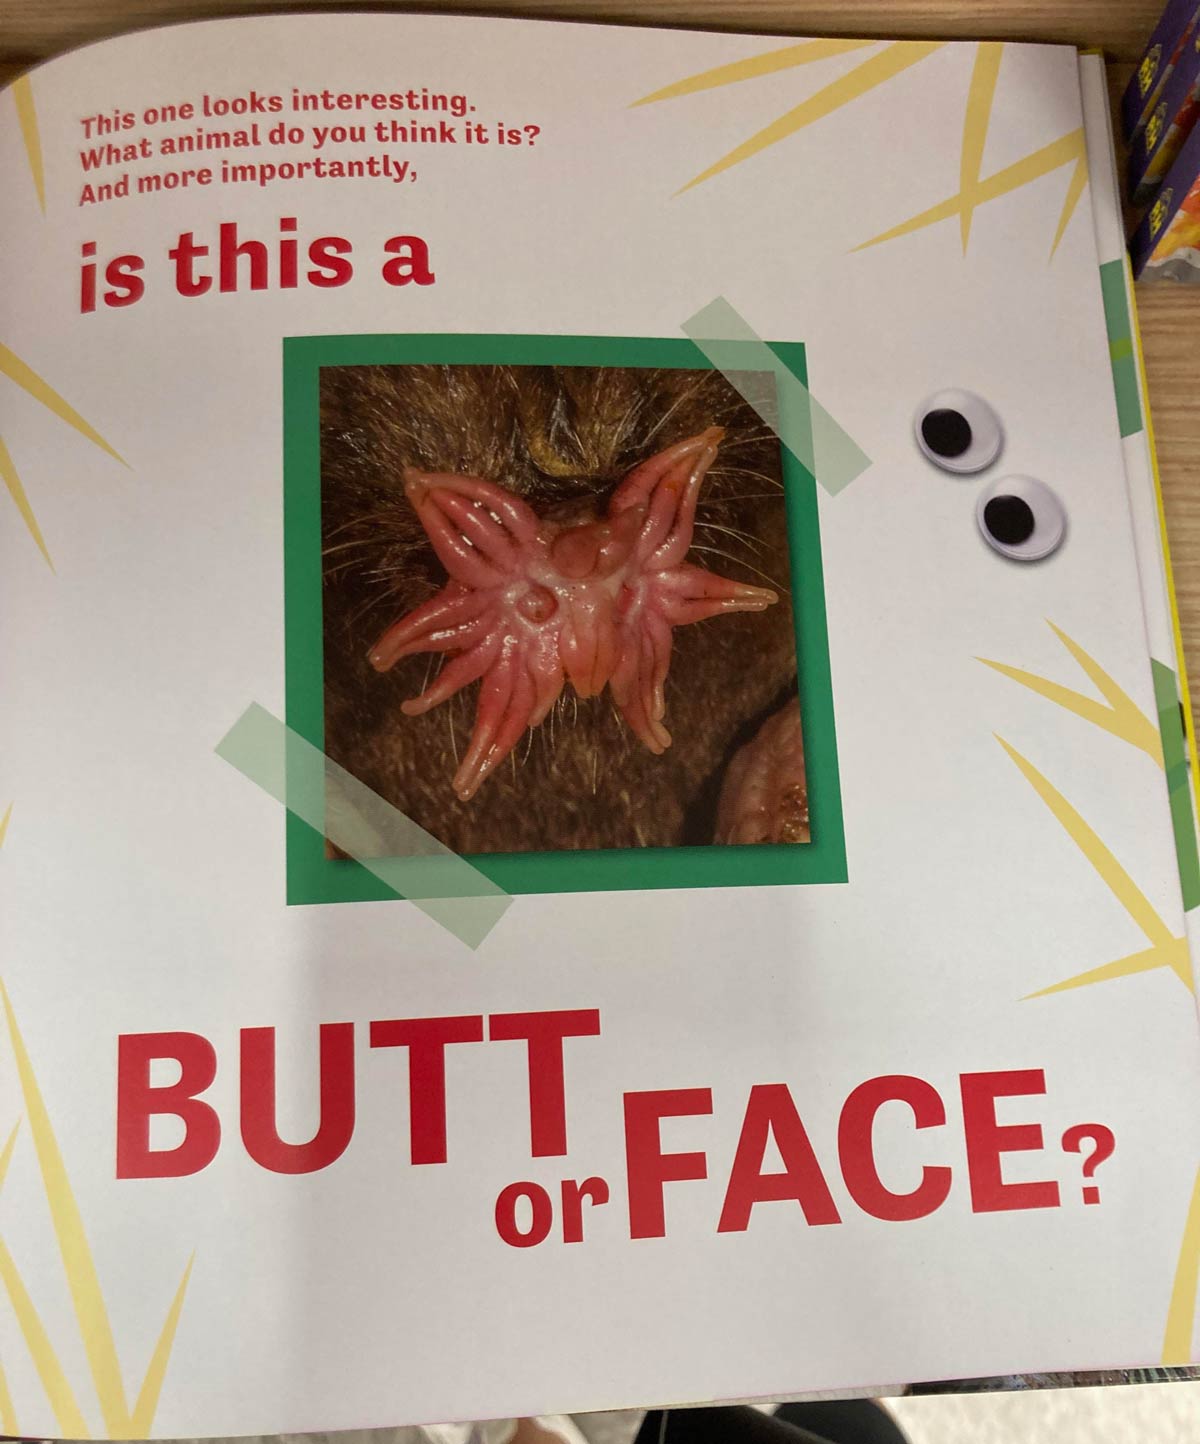 Children’s books are getting wild out here